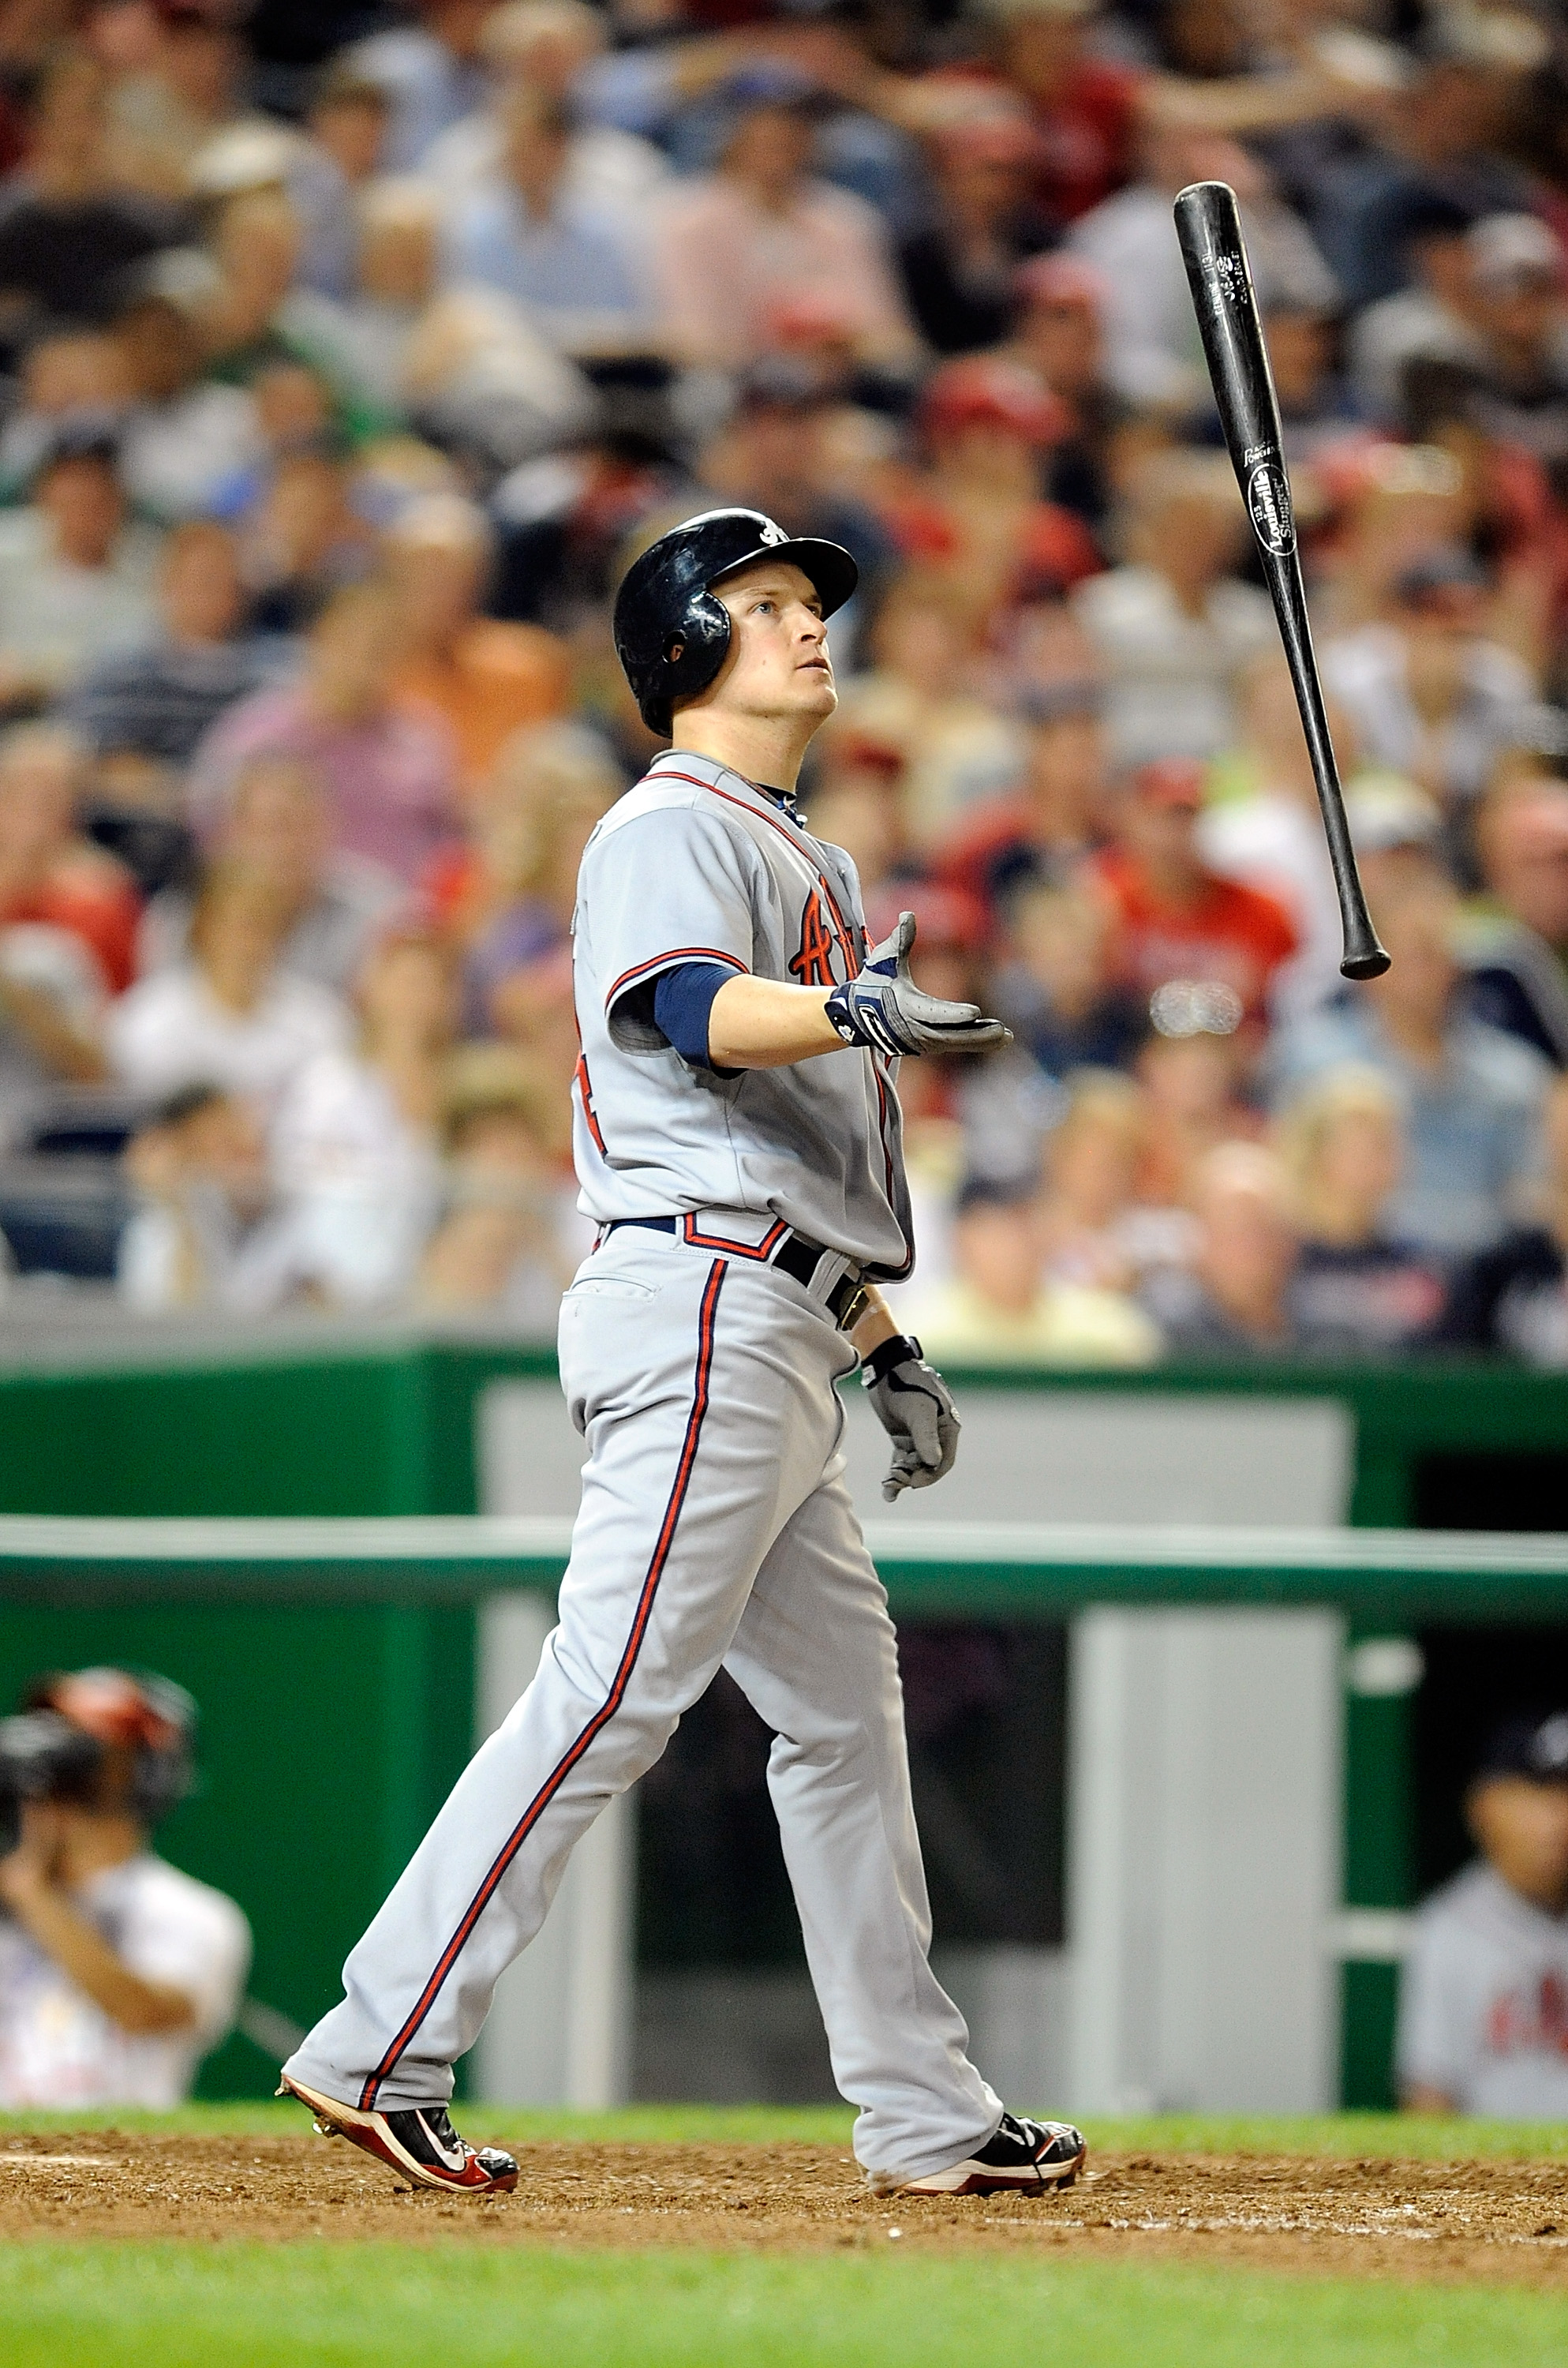 WASHINGTON - SEPTEMBER 24:  Nate McLouth #24 of the Atlanta Braves tosses his bat after striking out against the Washington Nationals at Nationals Park on September 24, 2010 in Washington, DC.  (Photo by Greg Fiume/Getty Images)